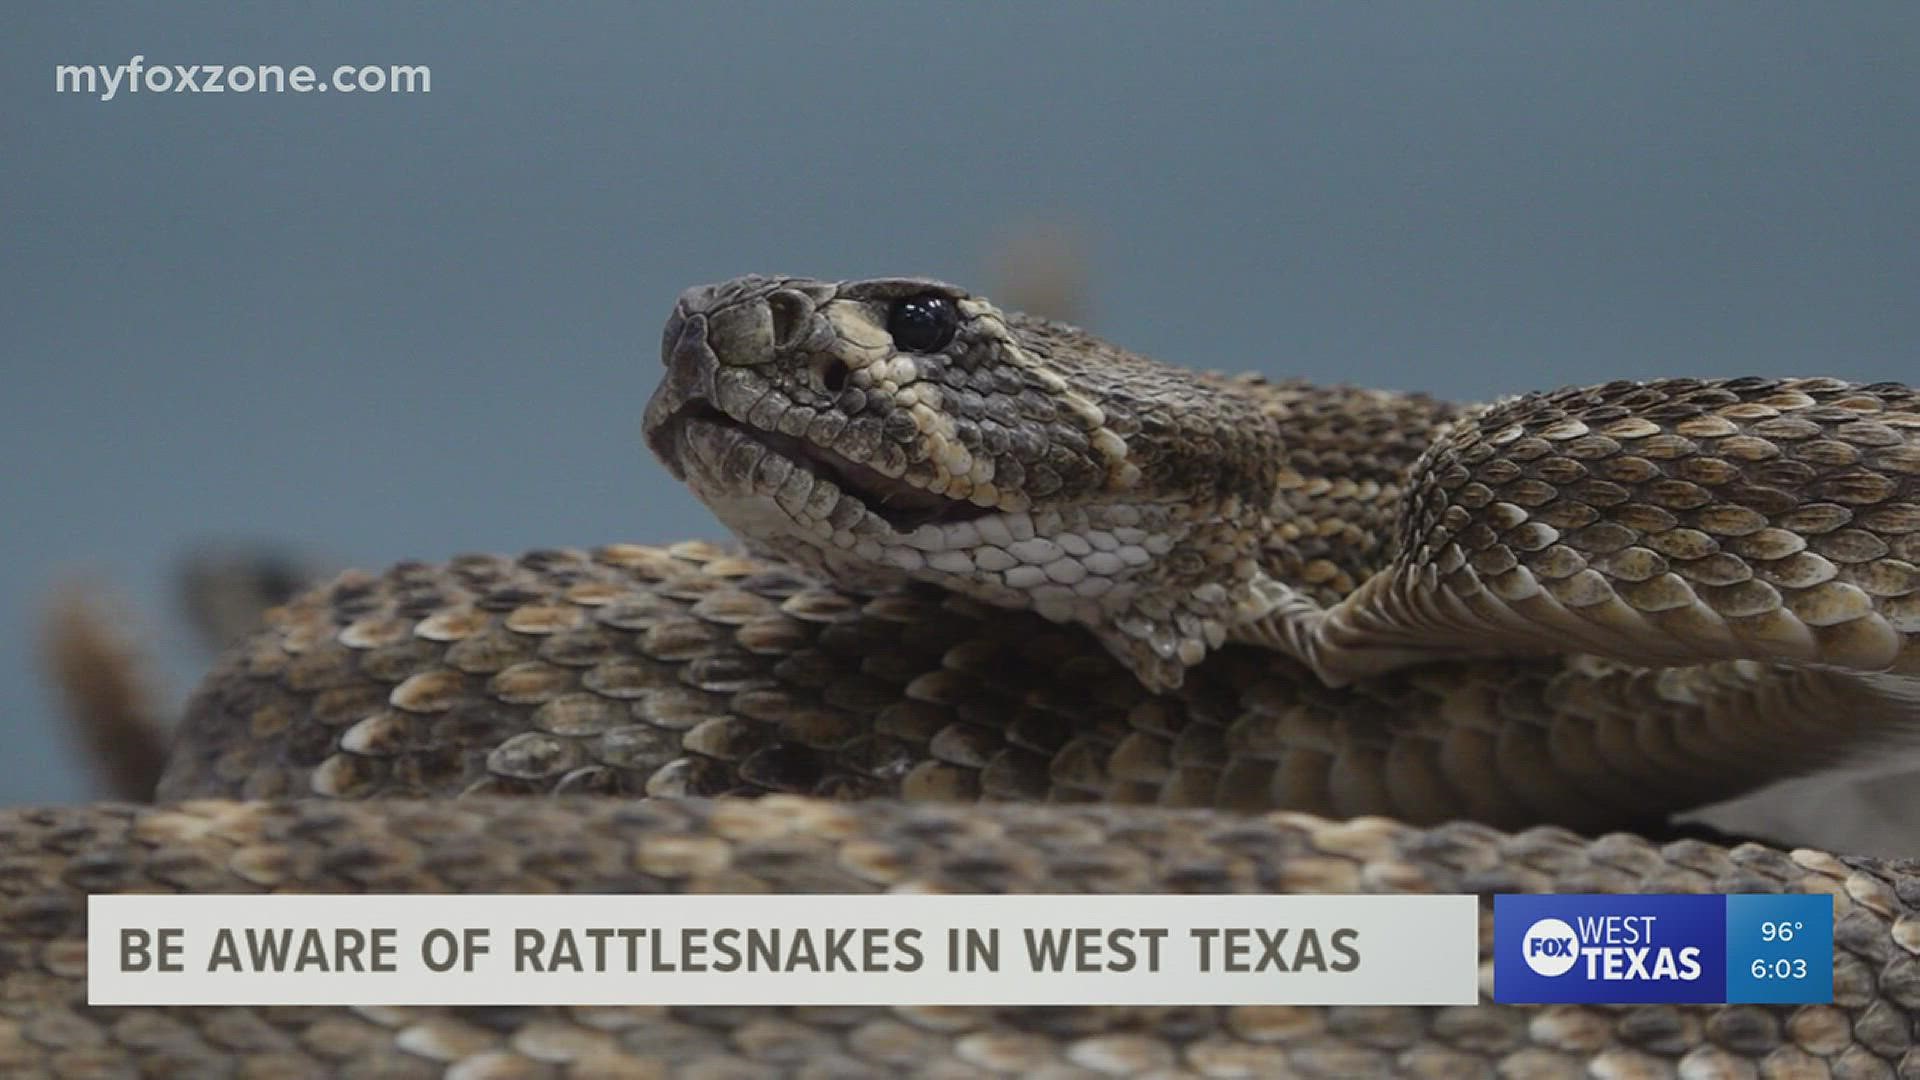 There has been an increase of calls involving rattlesnake bites around West Texas. Local officials share tips on what to do if you see one or are ever bitten.